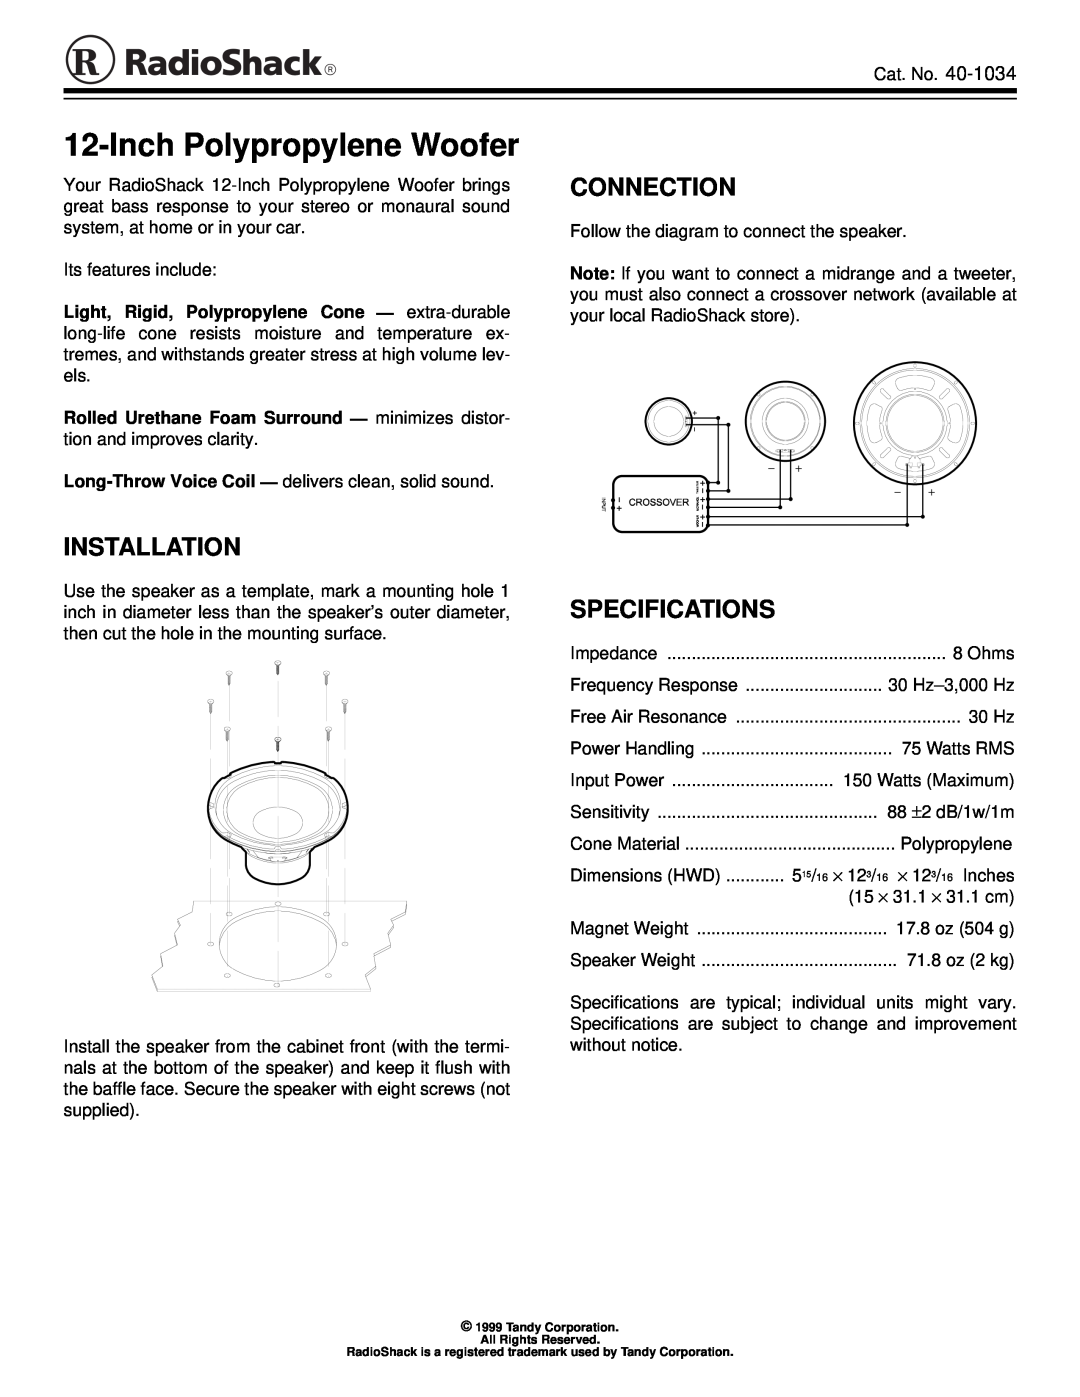 Radio Shack 40-1034 specifications InchPolypropylene Woofer, Connection, Installation, Specifications 